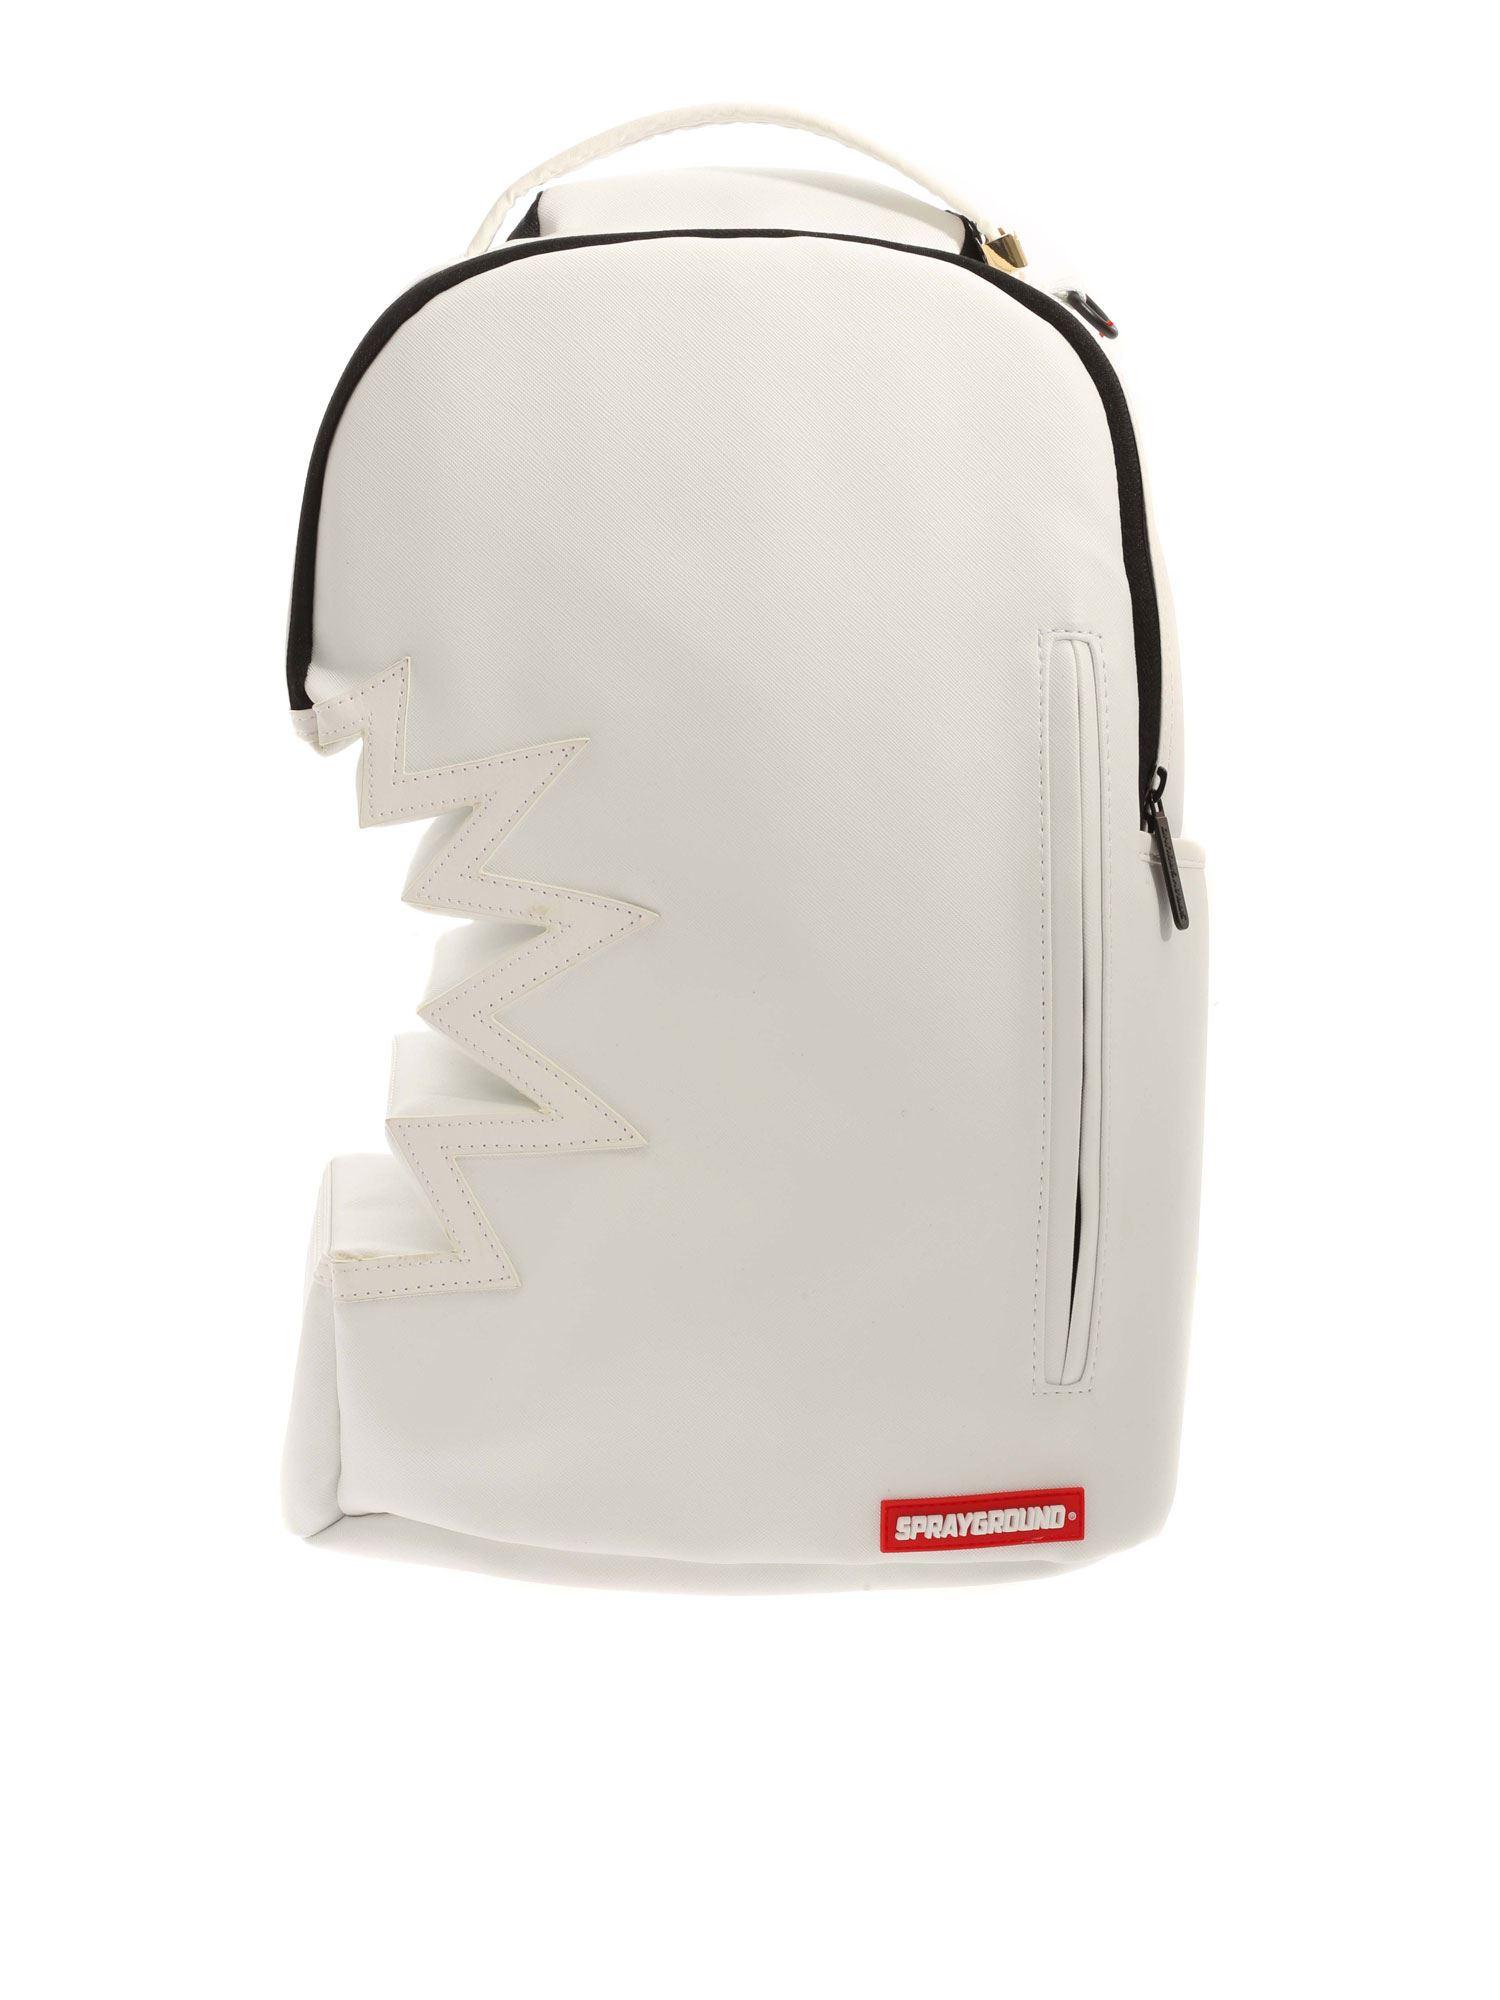 Sprayground Synthetic Shark Bite Limited Edition Backpack in White for Men - Lyst